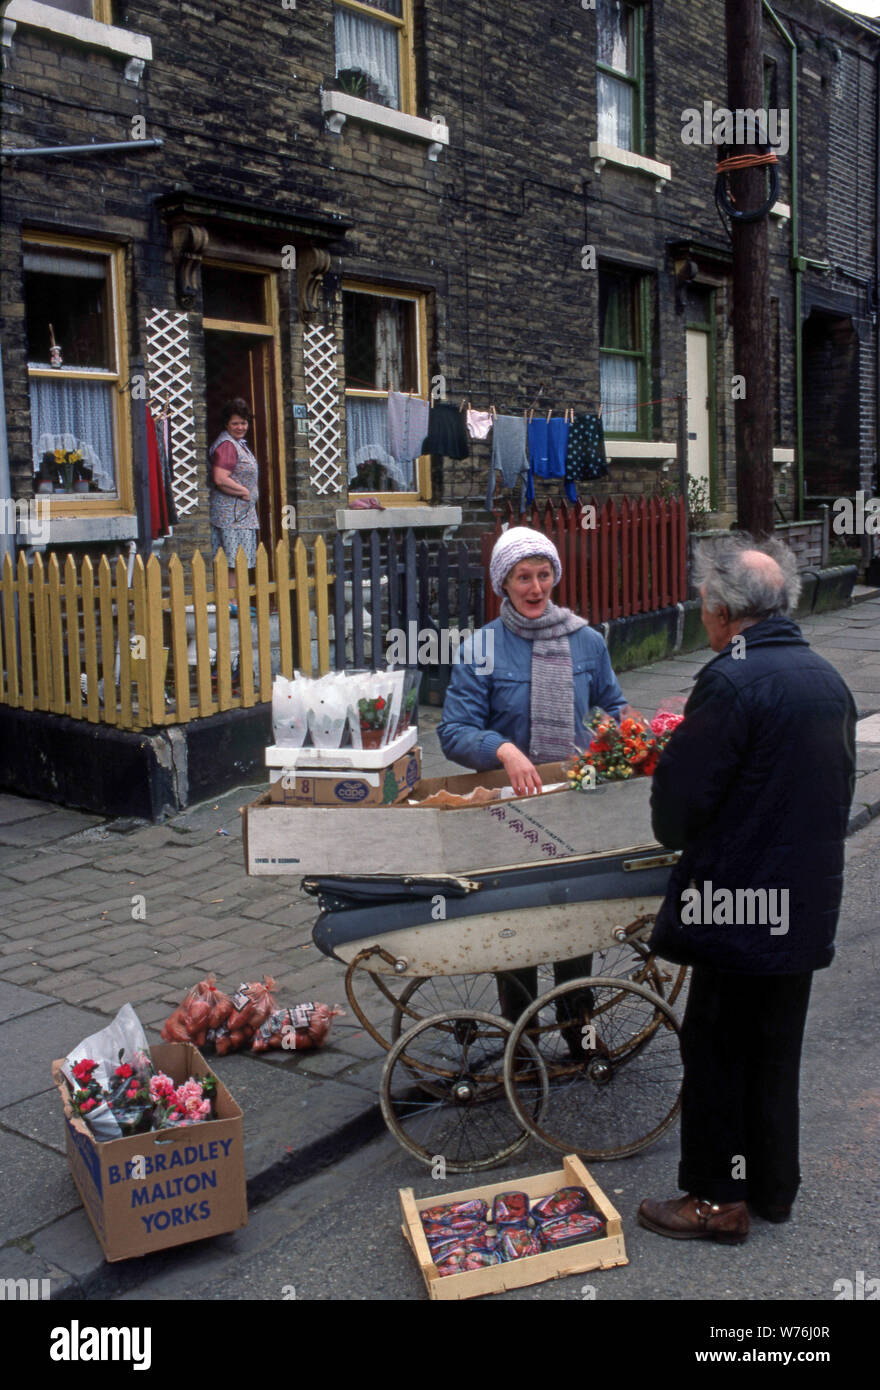 a neighbourhood in Bradford England in the late seventies. A man selling flowers and strawberries in an old baby carriage. Stock Photo